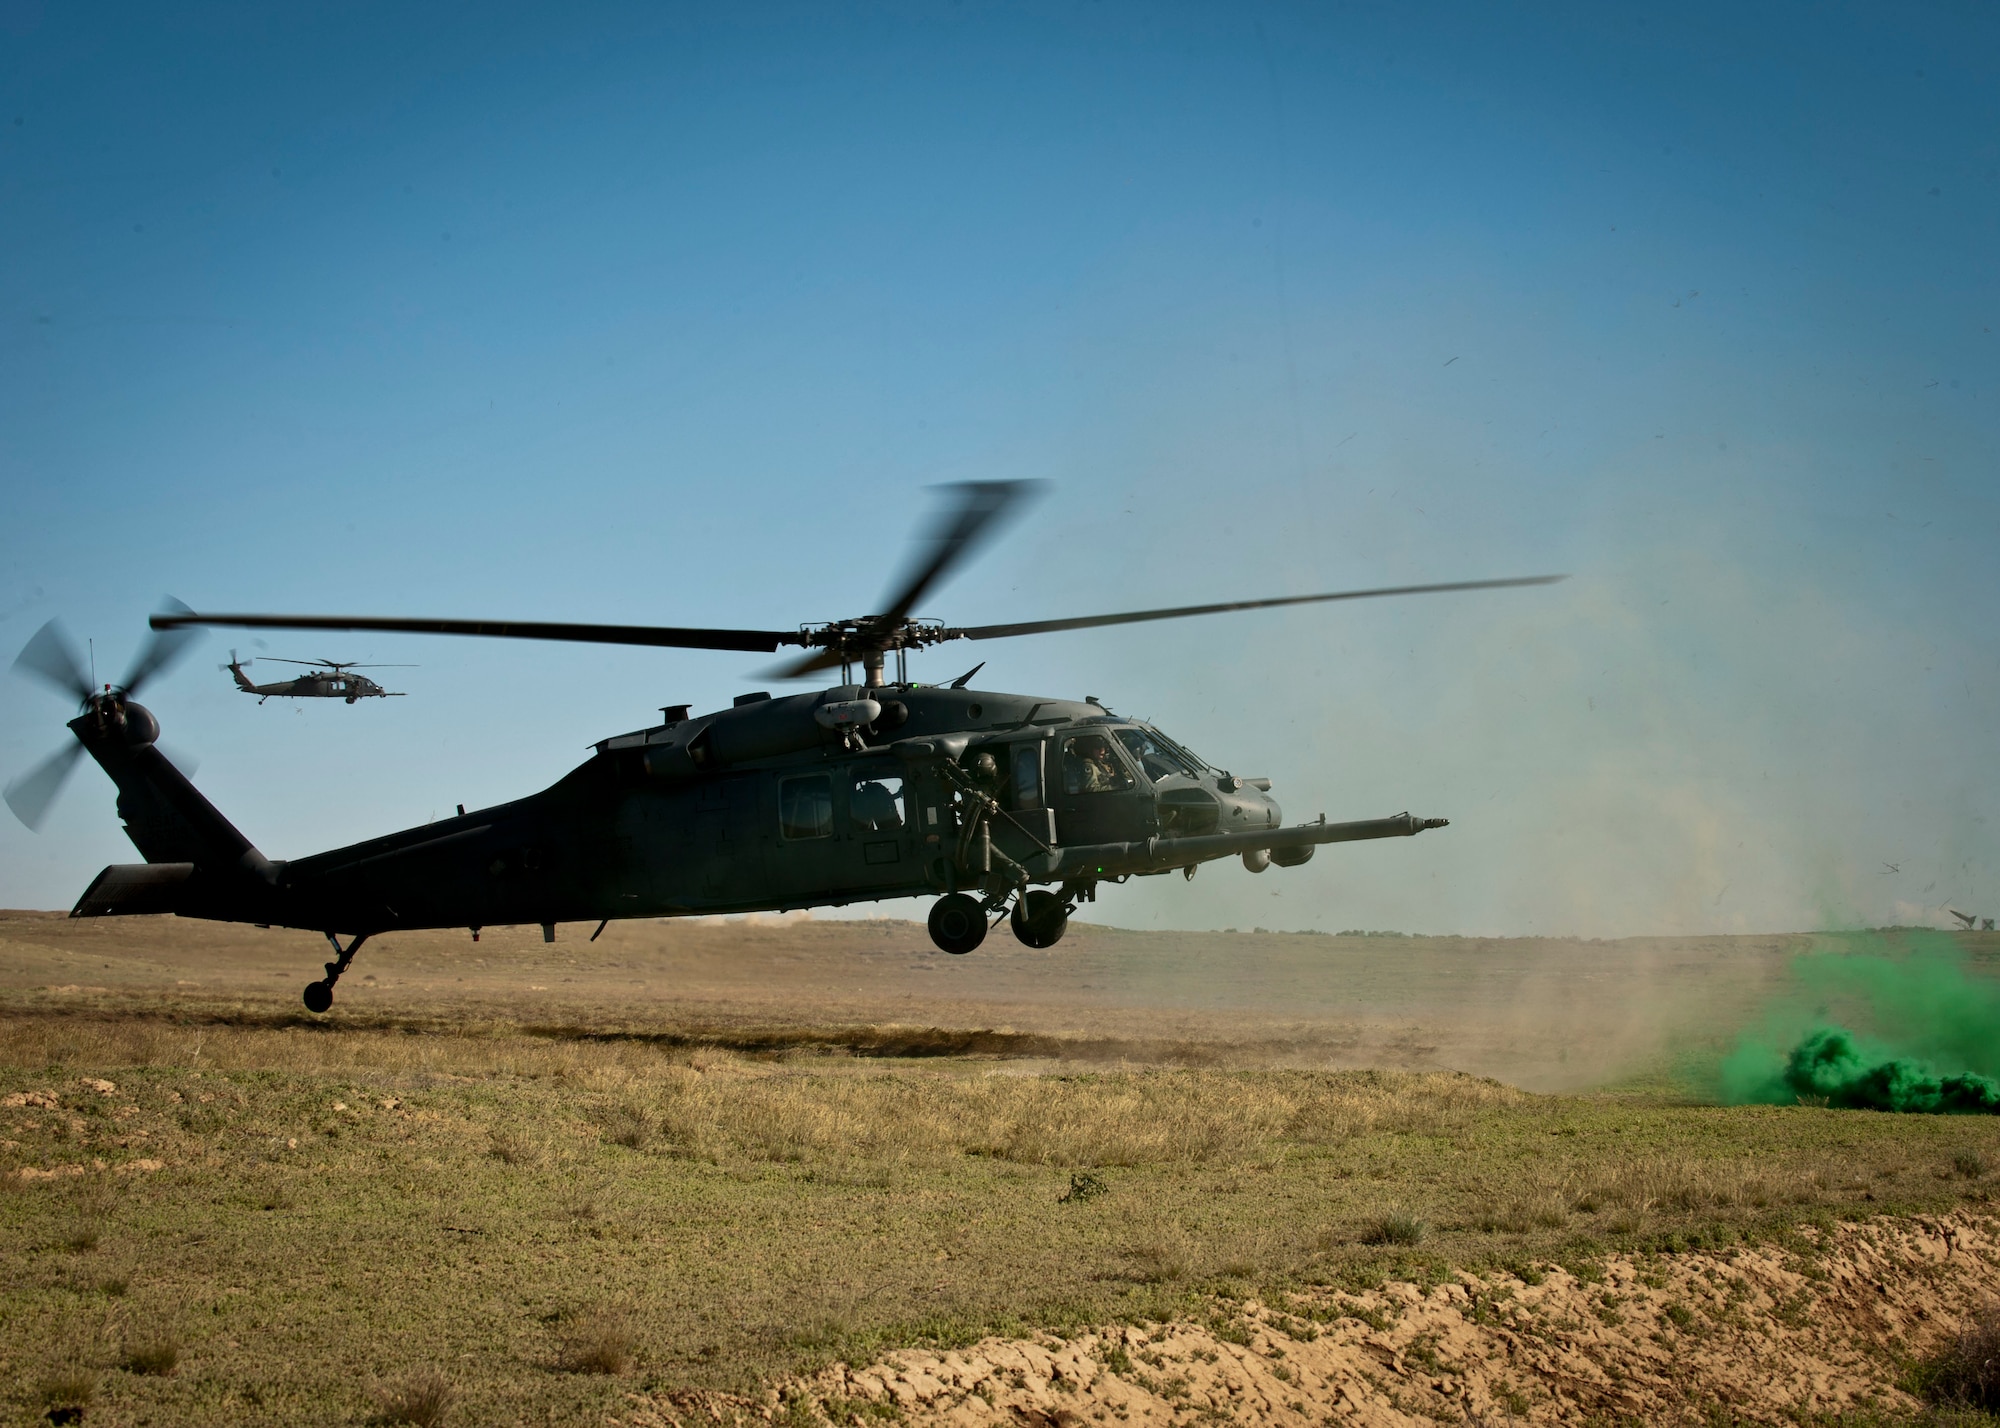 A U.S. Air Force HH-60 Pave Hawk assigned to Nellis Air Force Base, Nev. prepares to land during the terminal employment phase portion of the USAF Weapons School pilot training, April 28, 2014, at Orchard Combat Training Center, Idaho.  The weapons school trains tactical experts in the art of integrated battle-space dominance across the land, air, space and cyber domains. (U.S. Air Force photo by Senior Airman Jason Couillard)